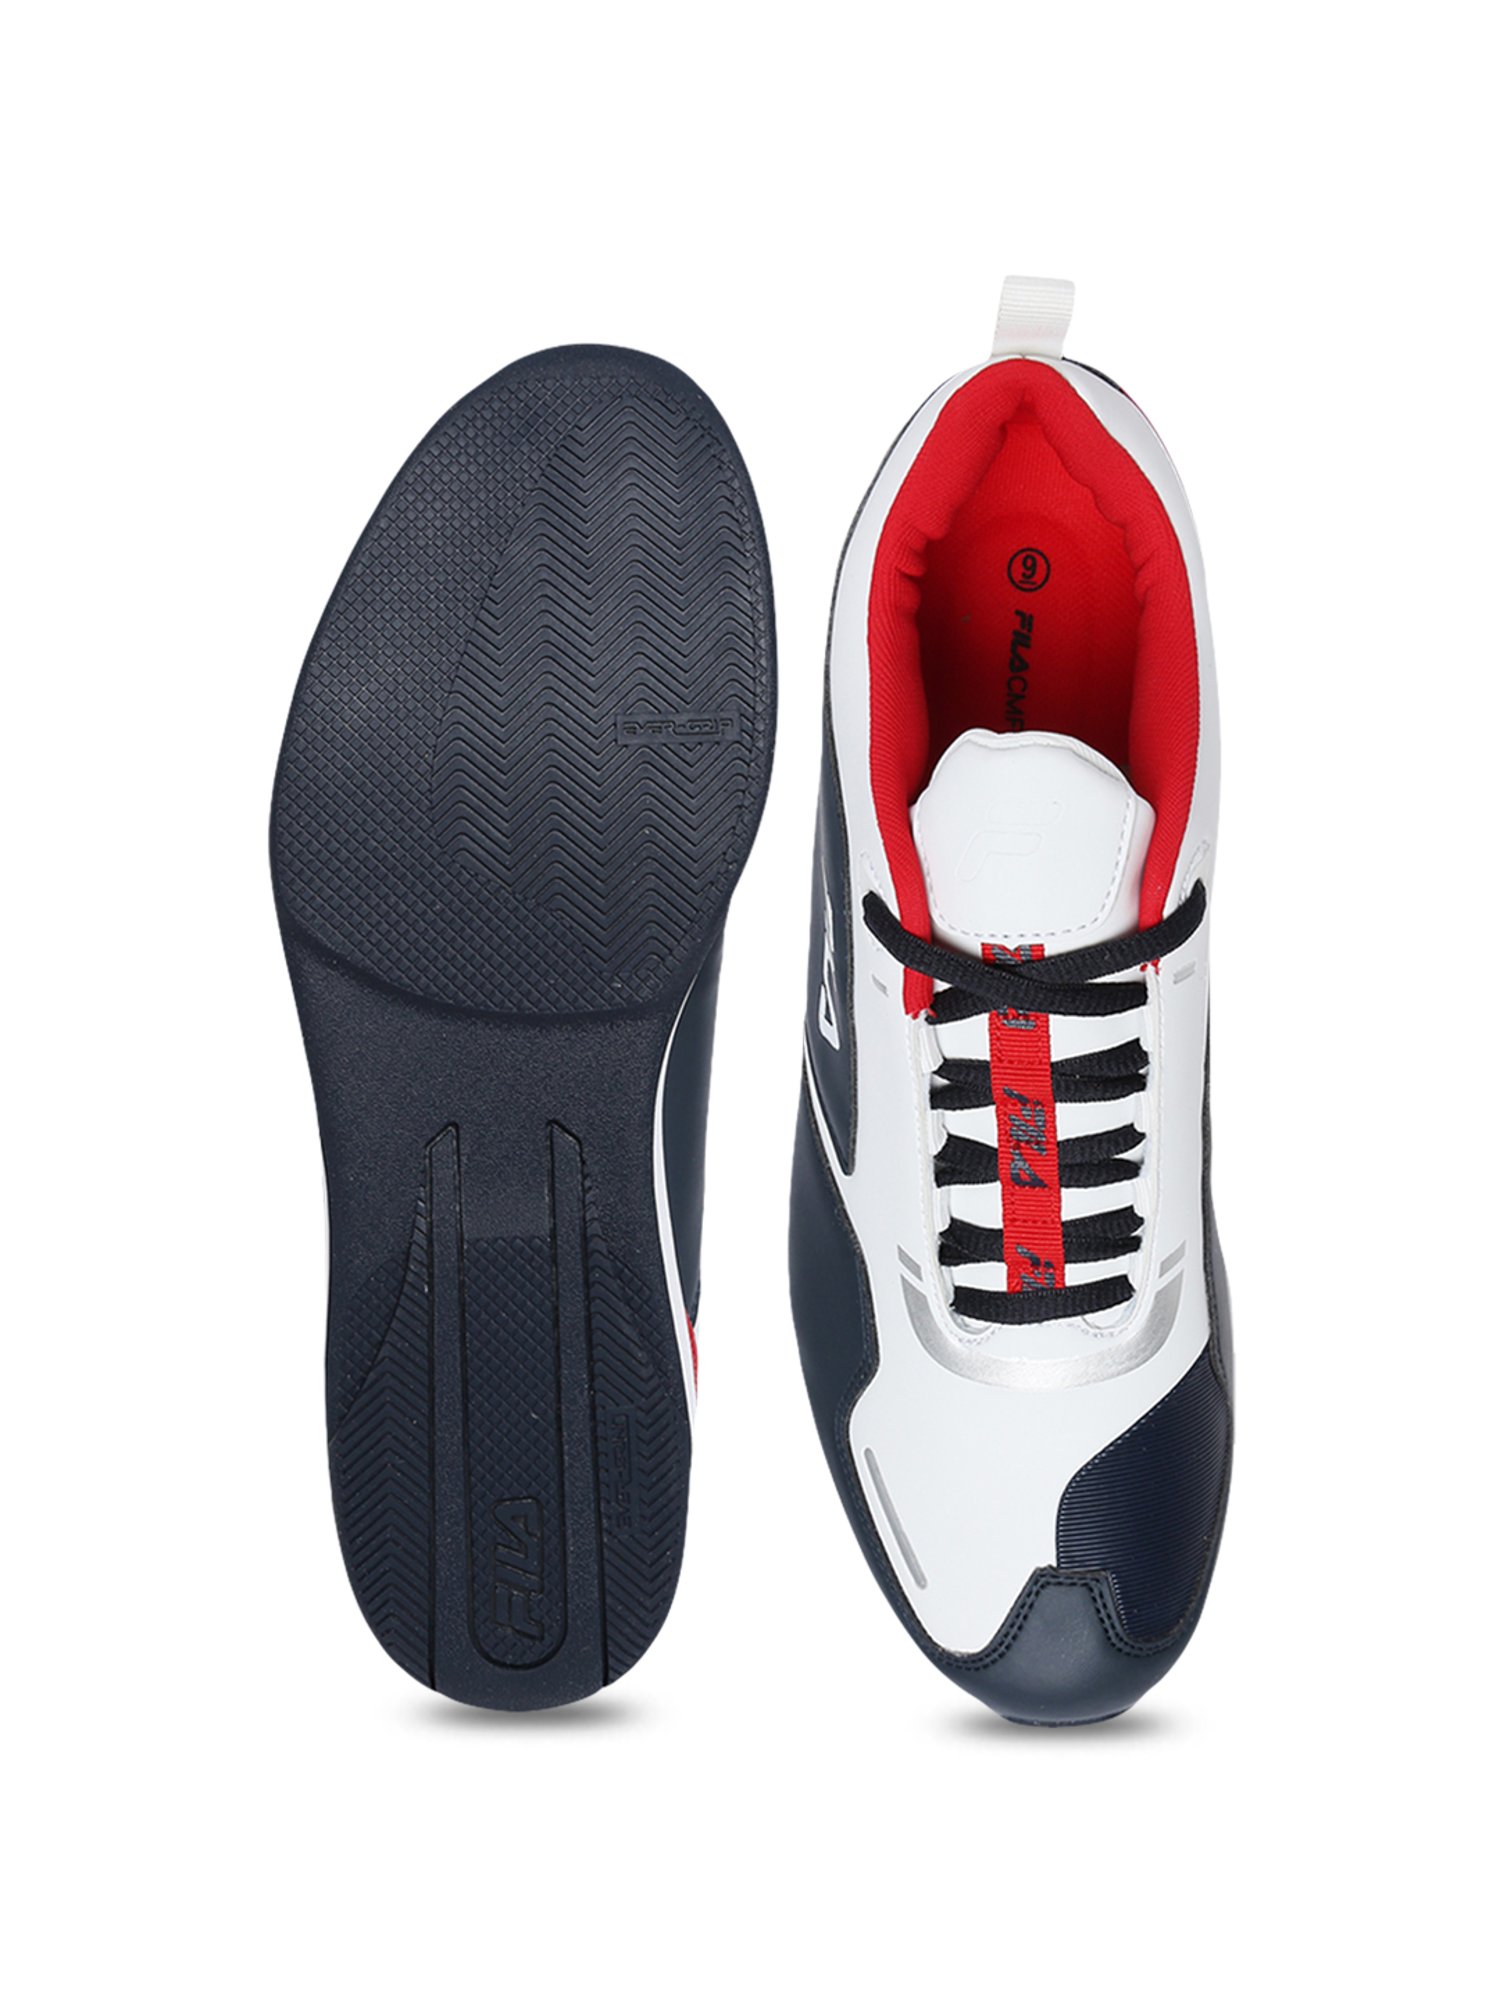 198s cycling shoes